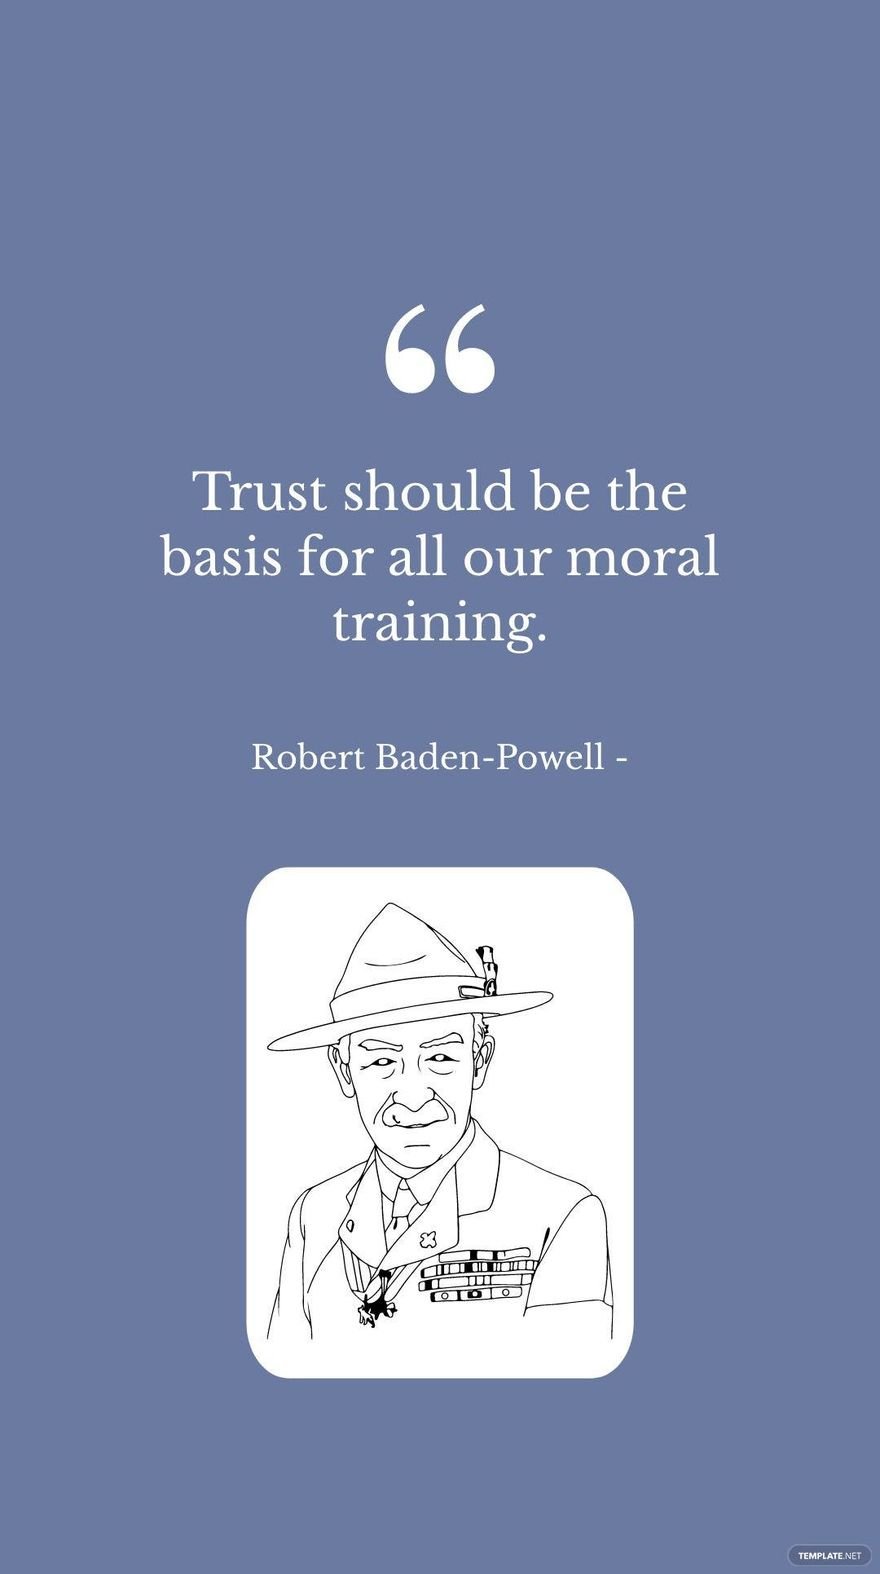 Free Robert Baden-Powell - Trust should be the basis for all our moral training. in JPG